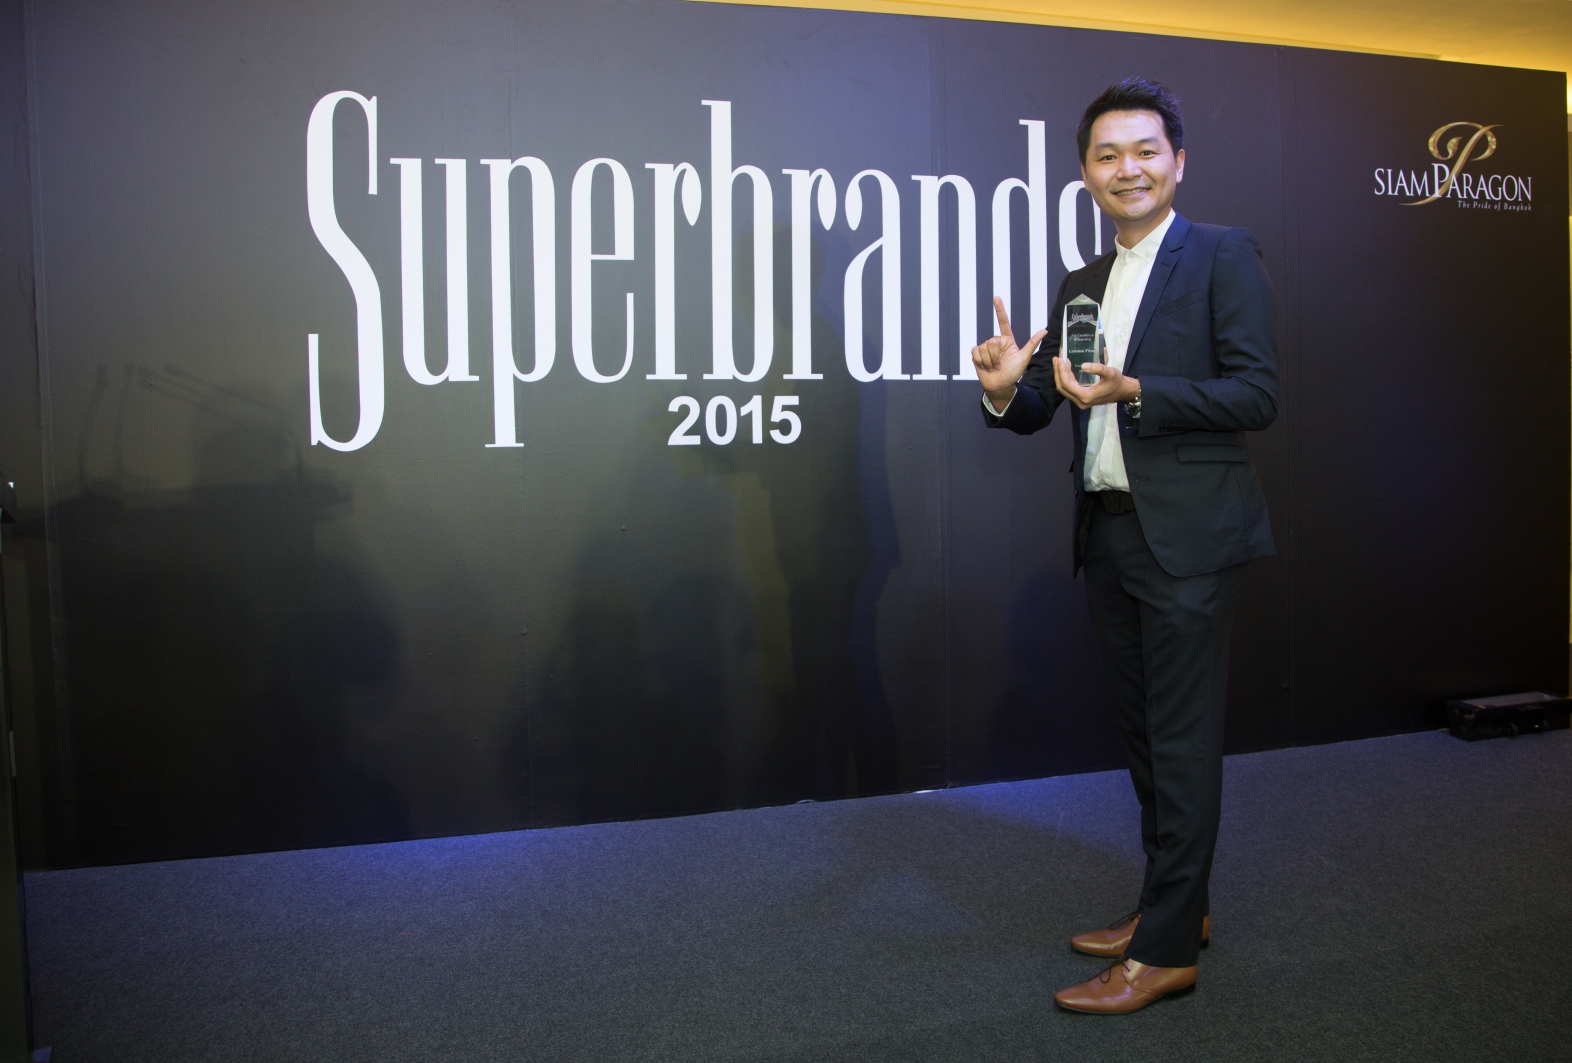 Lamina won the Top Brand of the Year 2015 (Superbrands 2015) for 12 consecutive years.